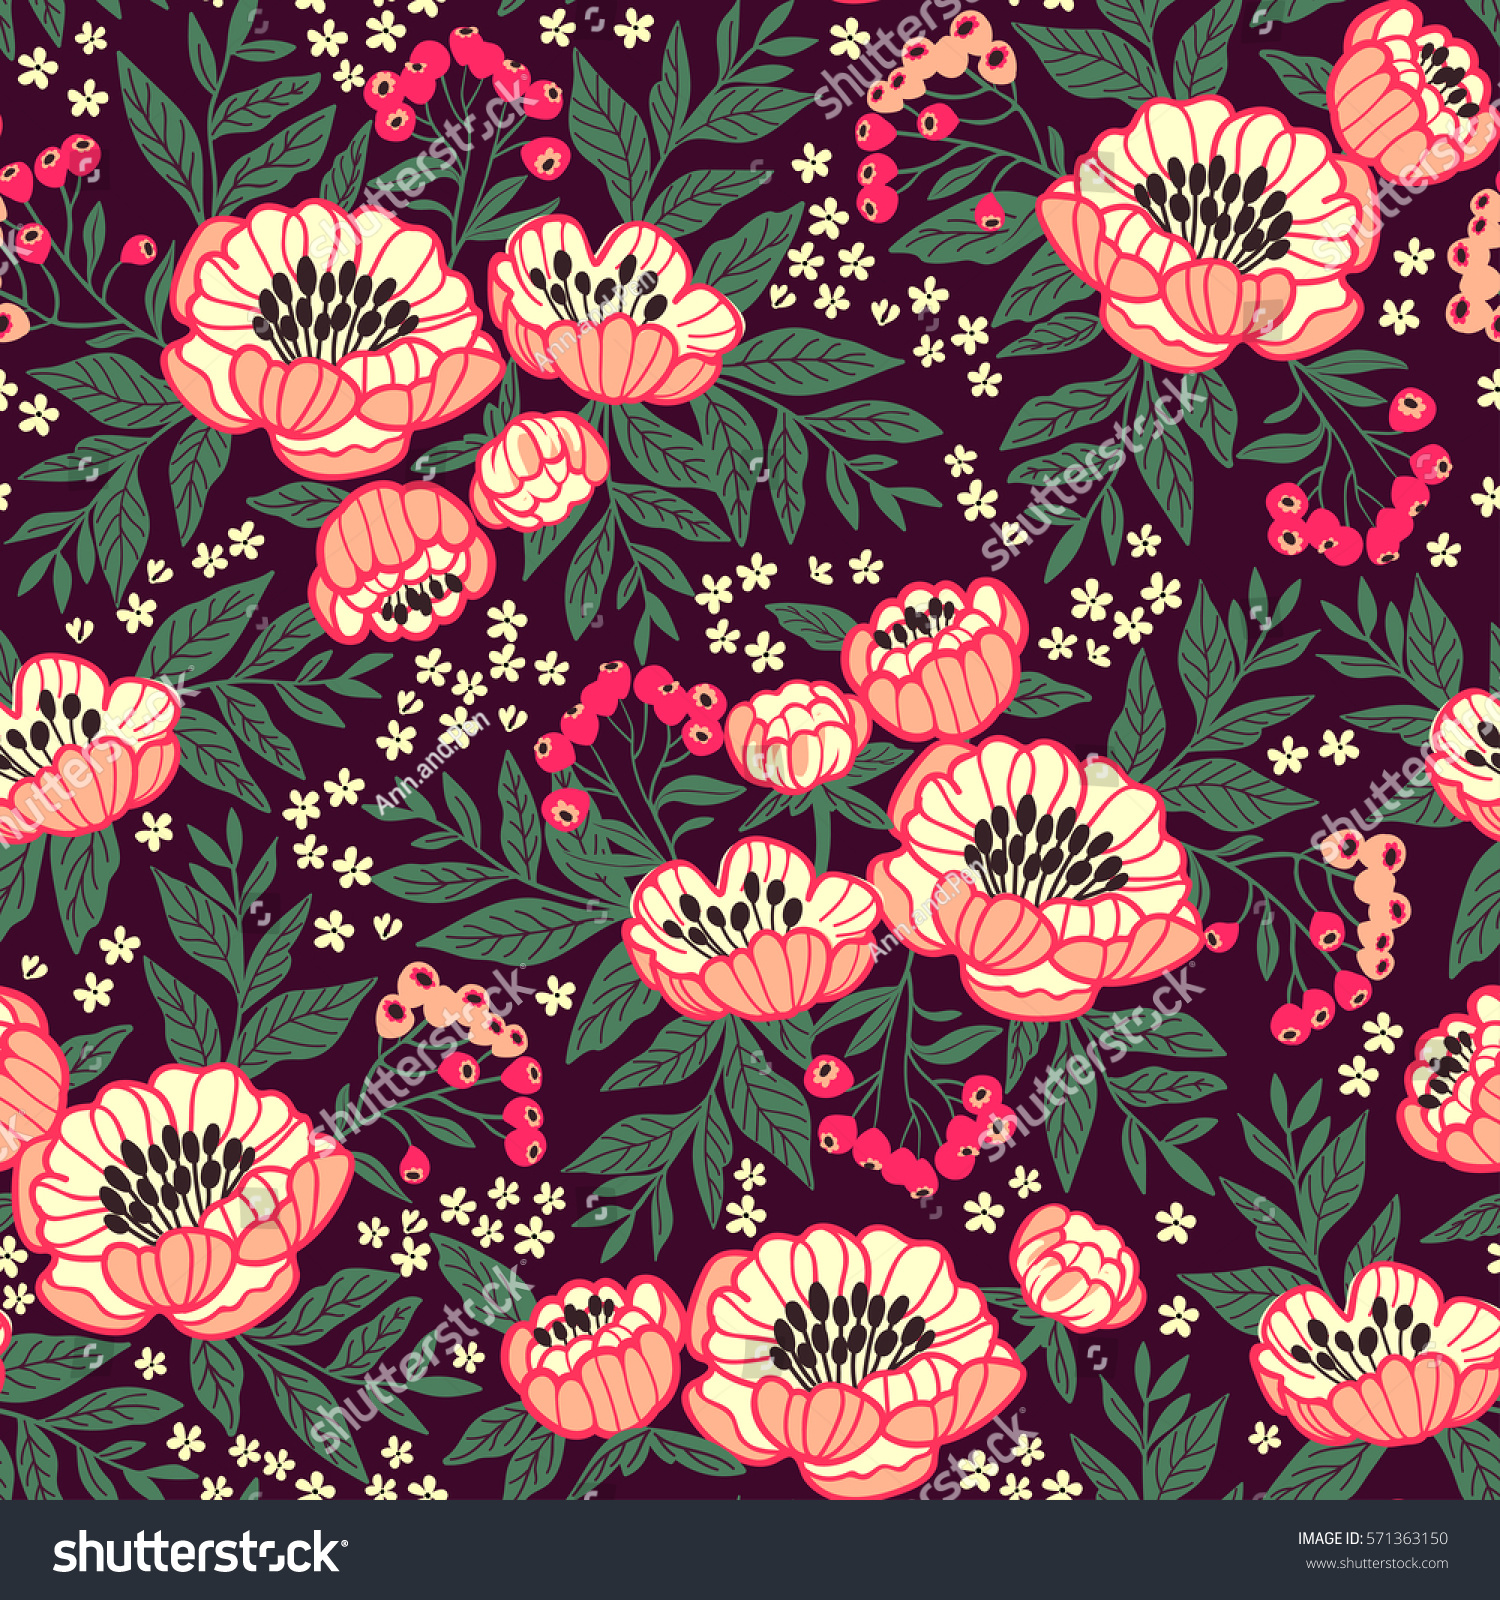 Seamless Floral Pattern Peonies Peony Flowers Stock Vector ...